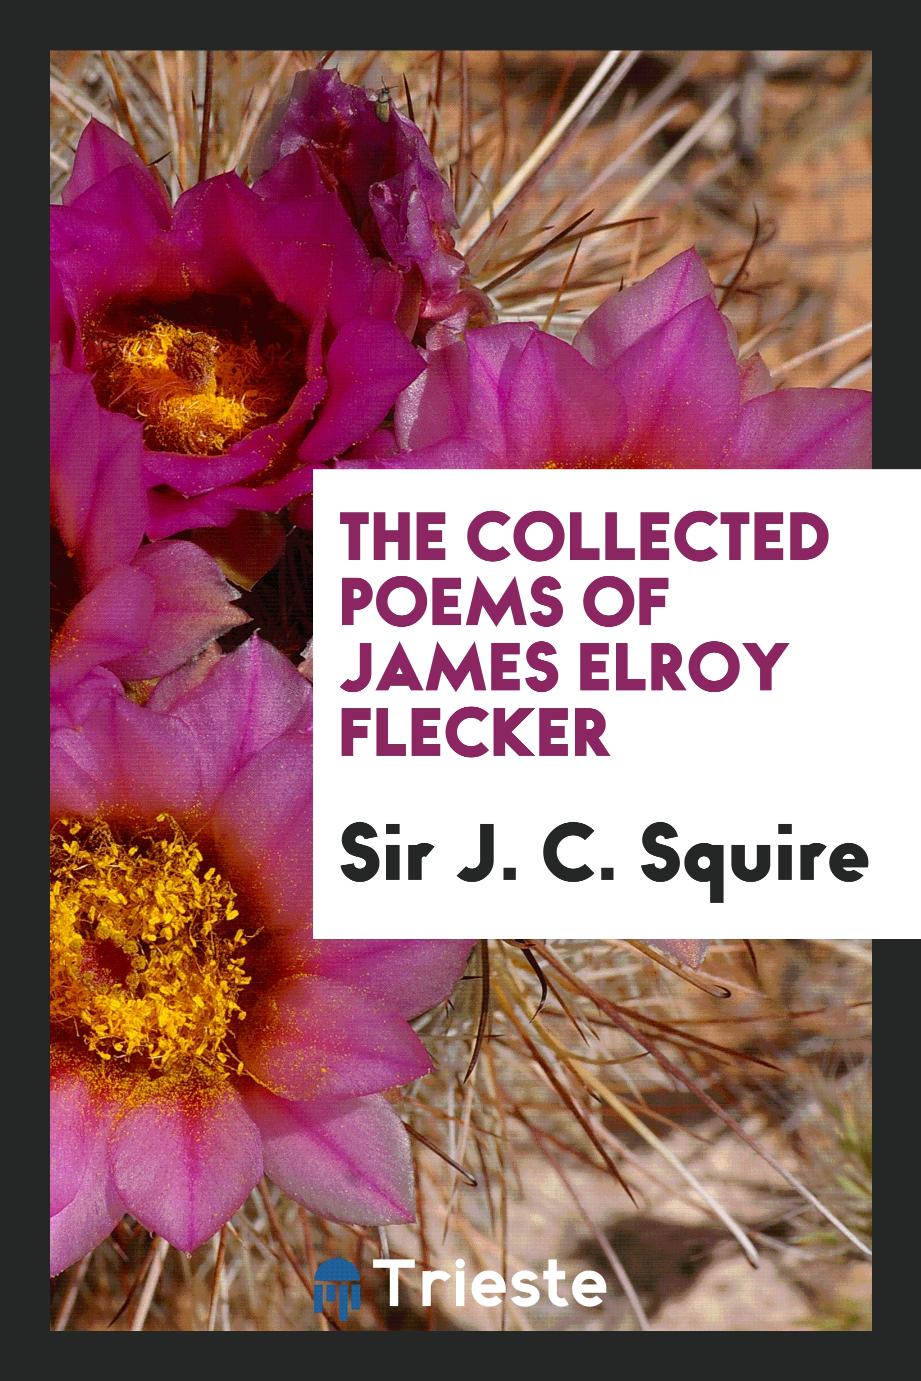 The Collected poems of James Elroy Flecker